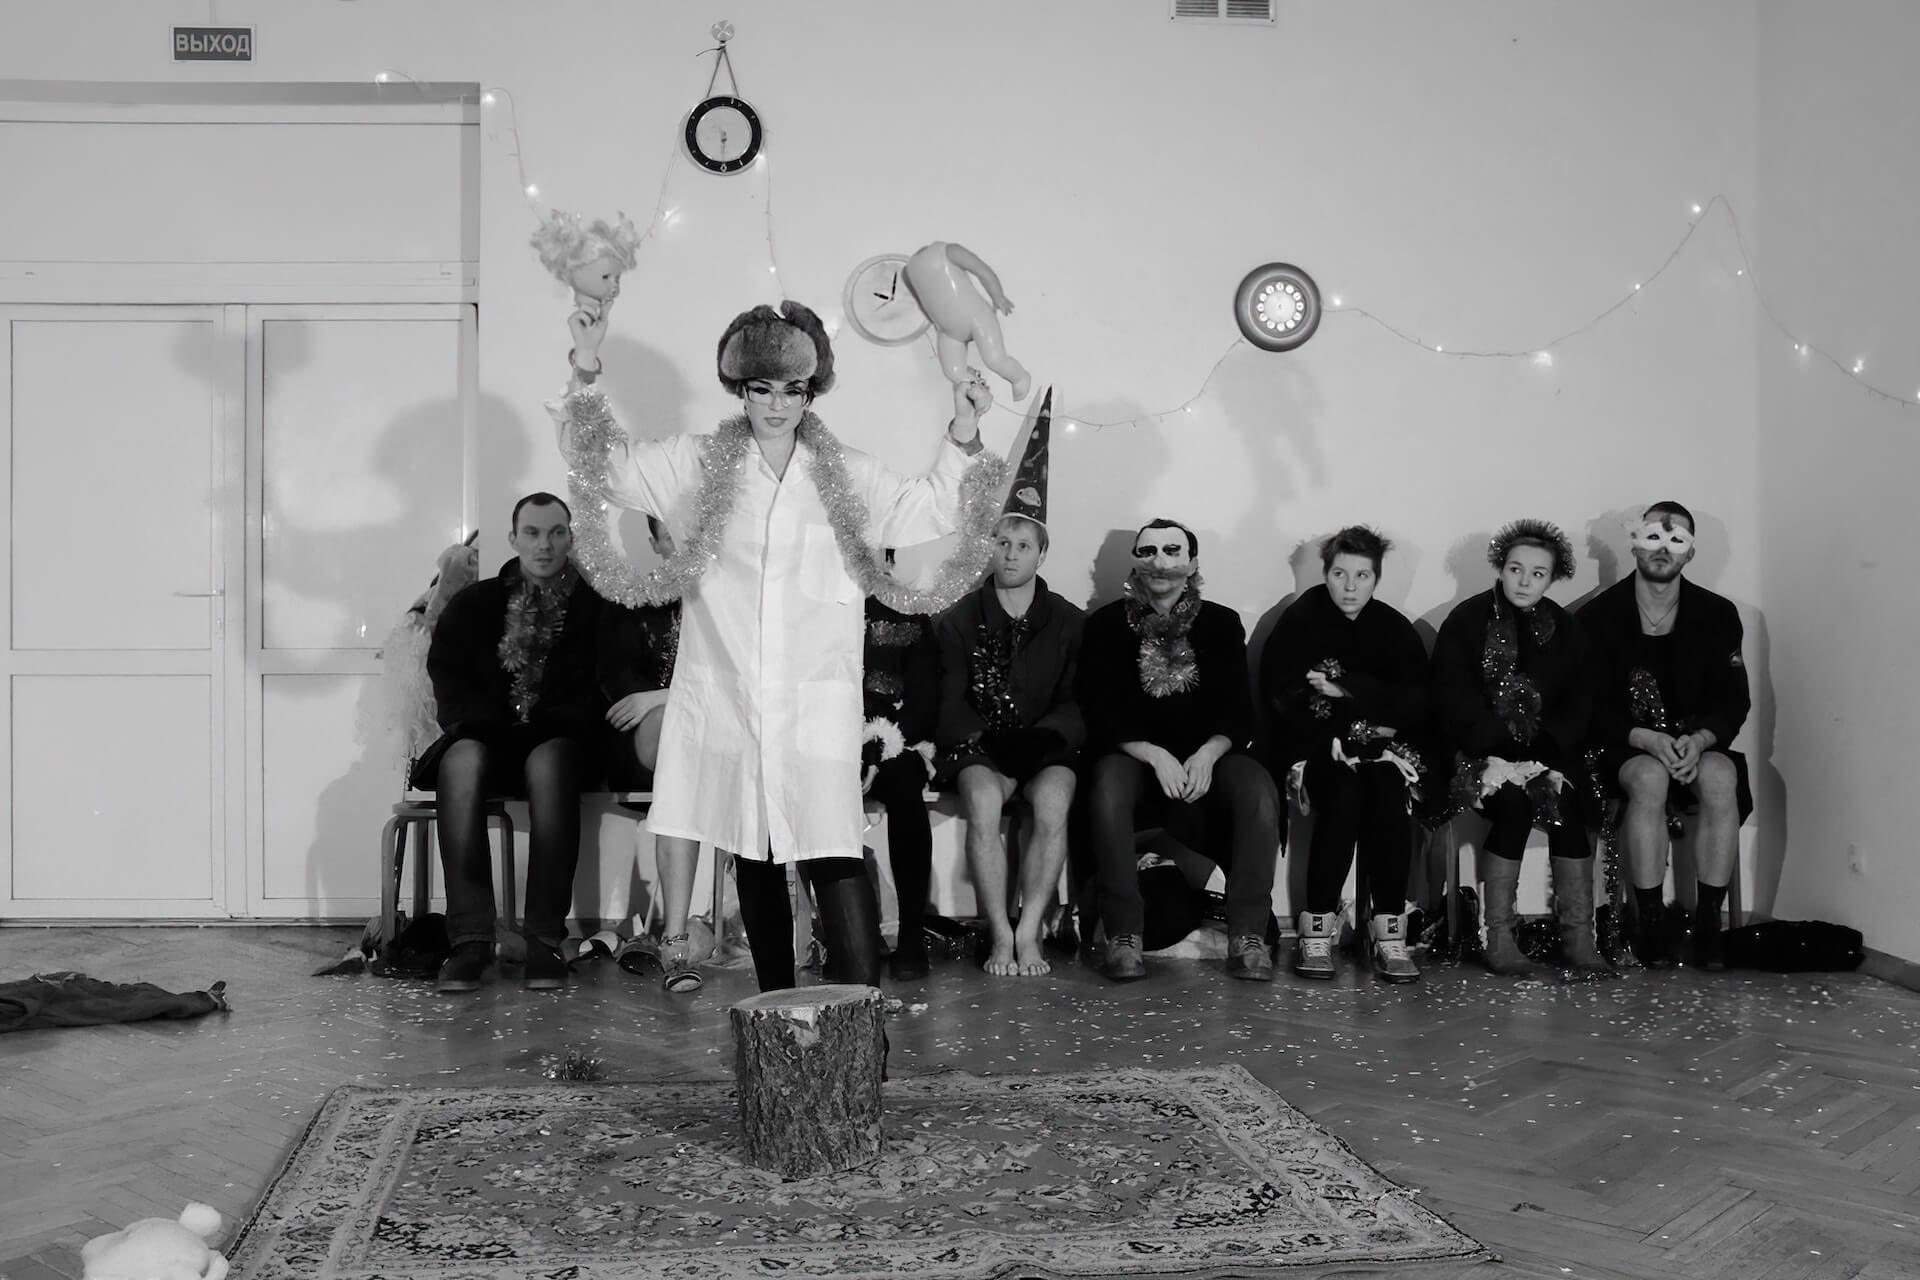 Black and white image of a performer in the middle wearing a ushanka hat. She has handcuffs on her wrists which are linked together with a long tinsel. The performer is holding a broken doll, the head on the right and and the body on the left. Other performers are sitting on a chair looking at the performer in the middle.